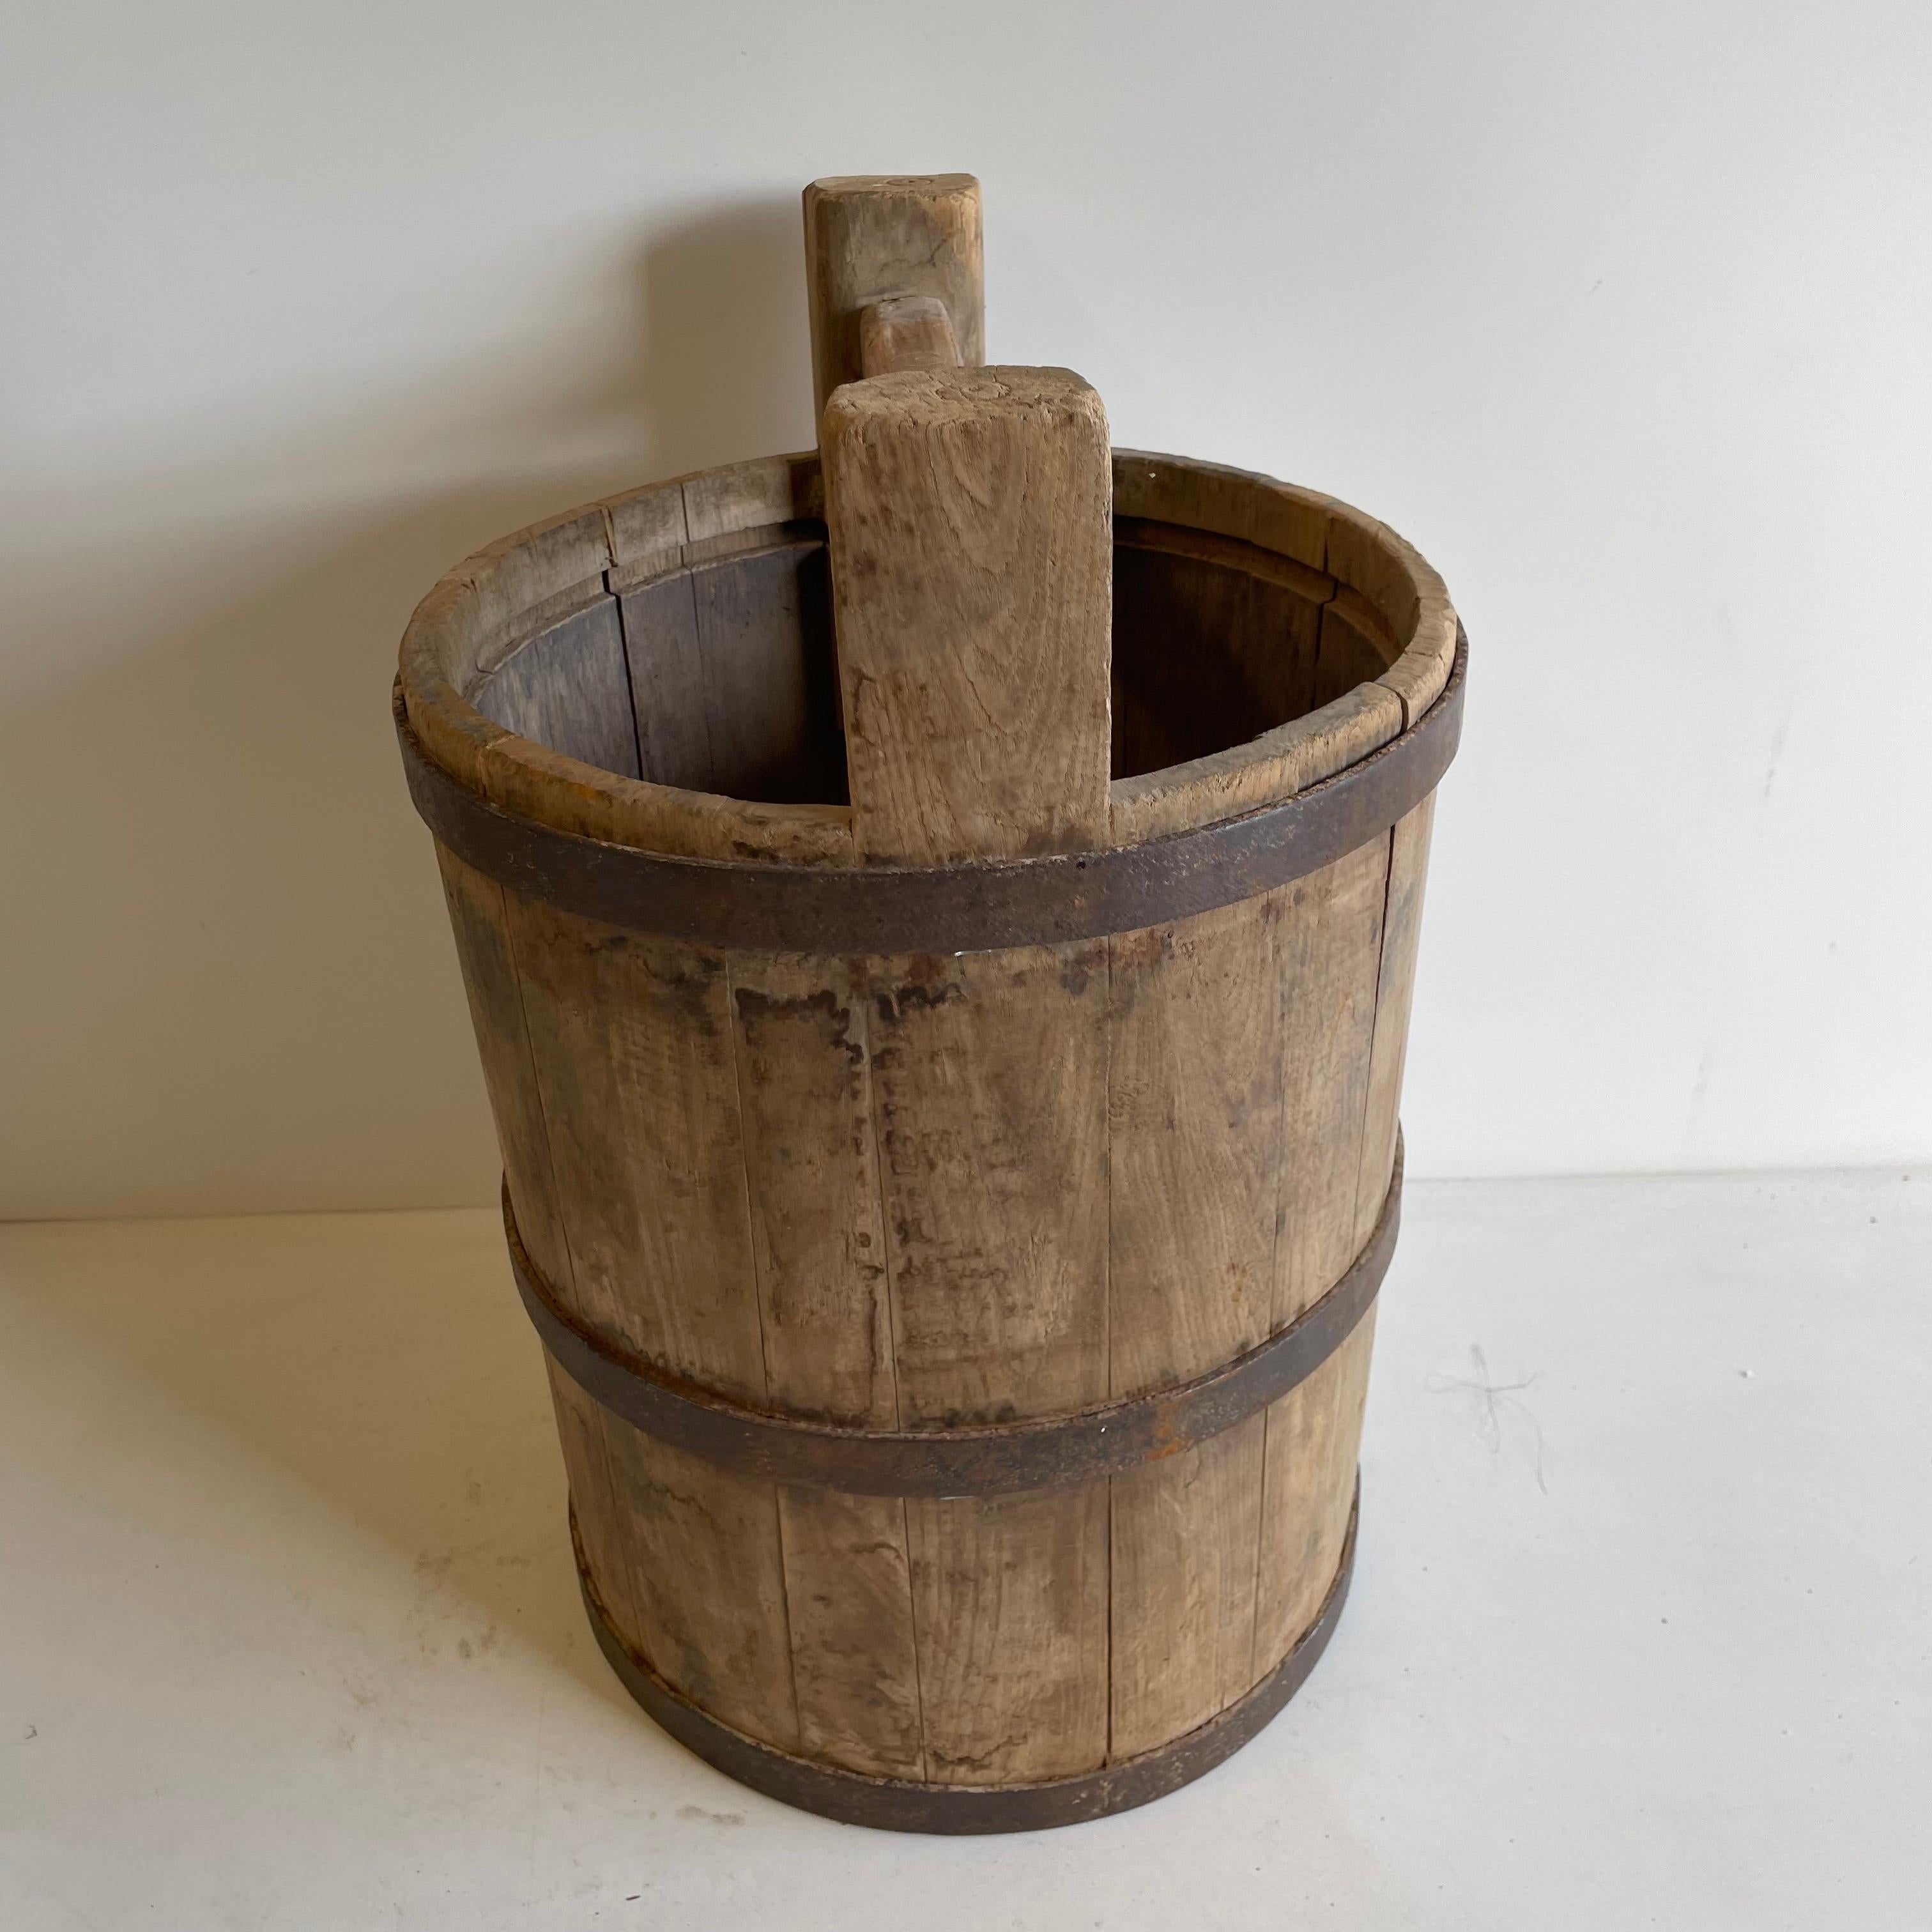 Antique Asian Cypress wood buckets used in the fields to collect vegetables, and food. Indoor or outdoor use. 
Measures: 19.5